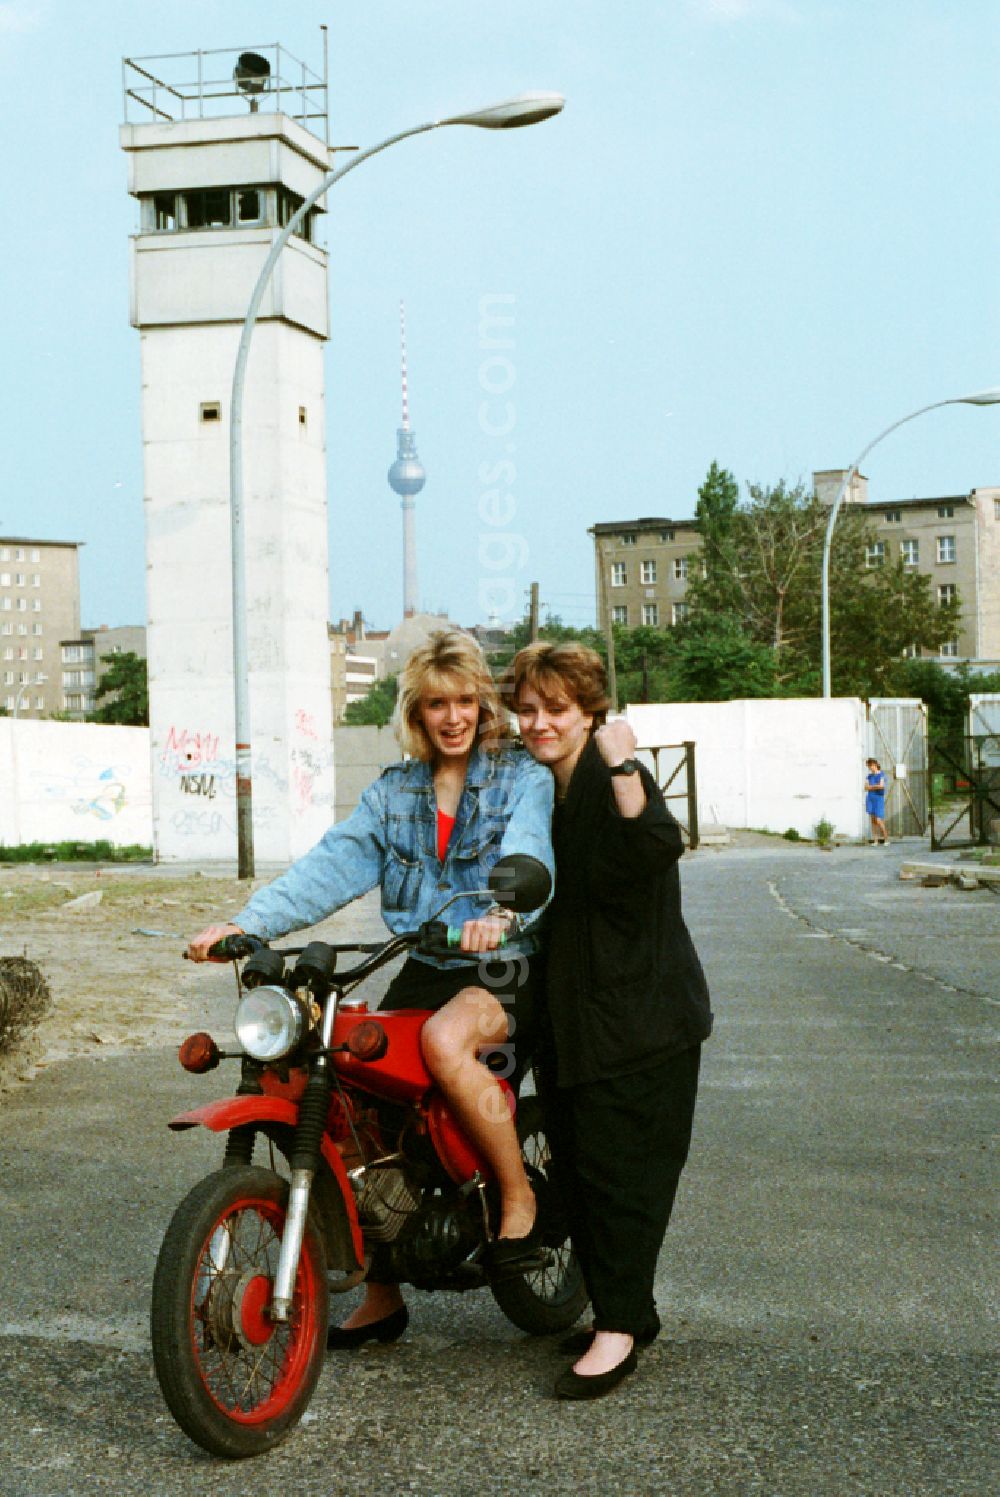 GDR image archive: Berlin - Two young women driving a S5